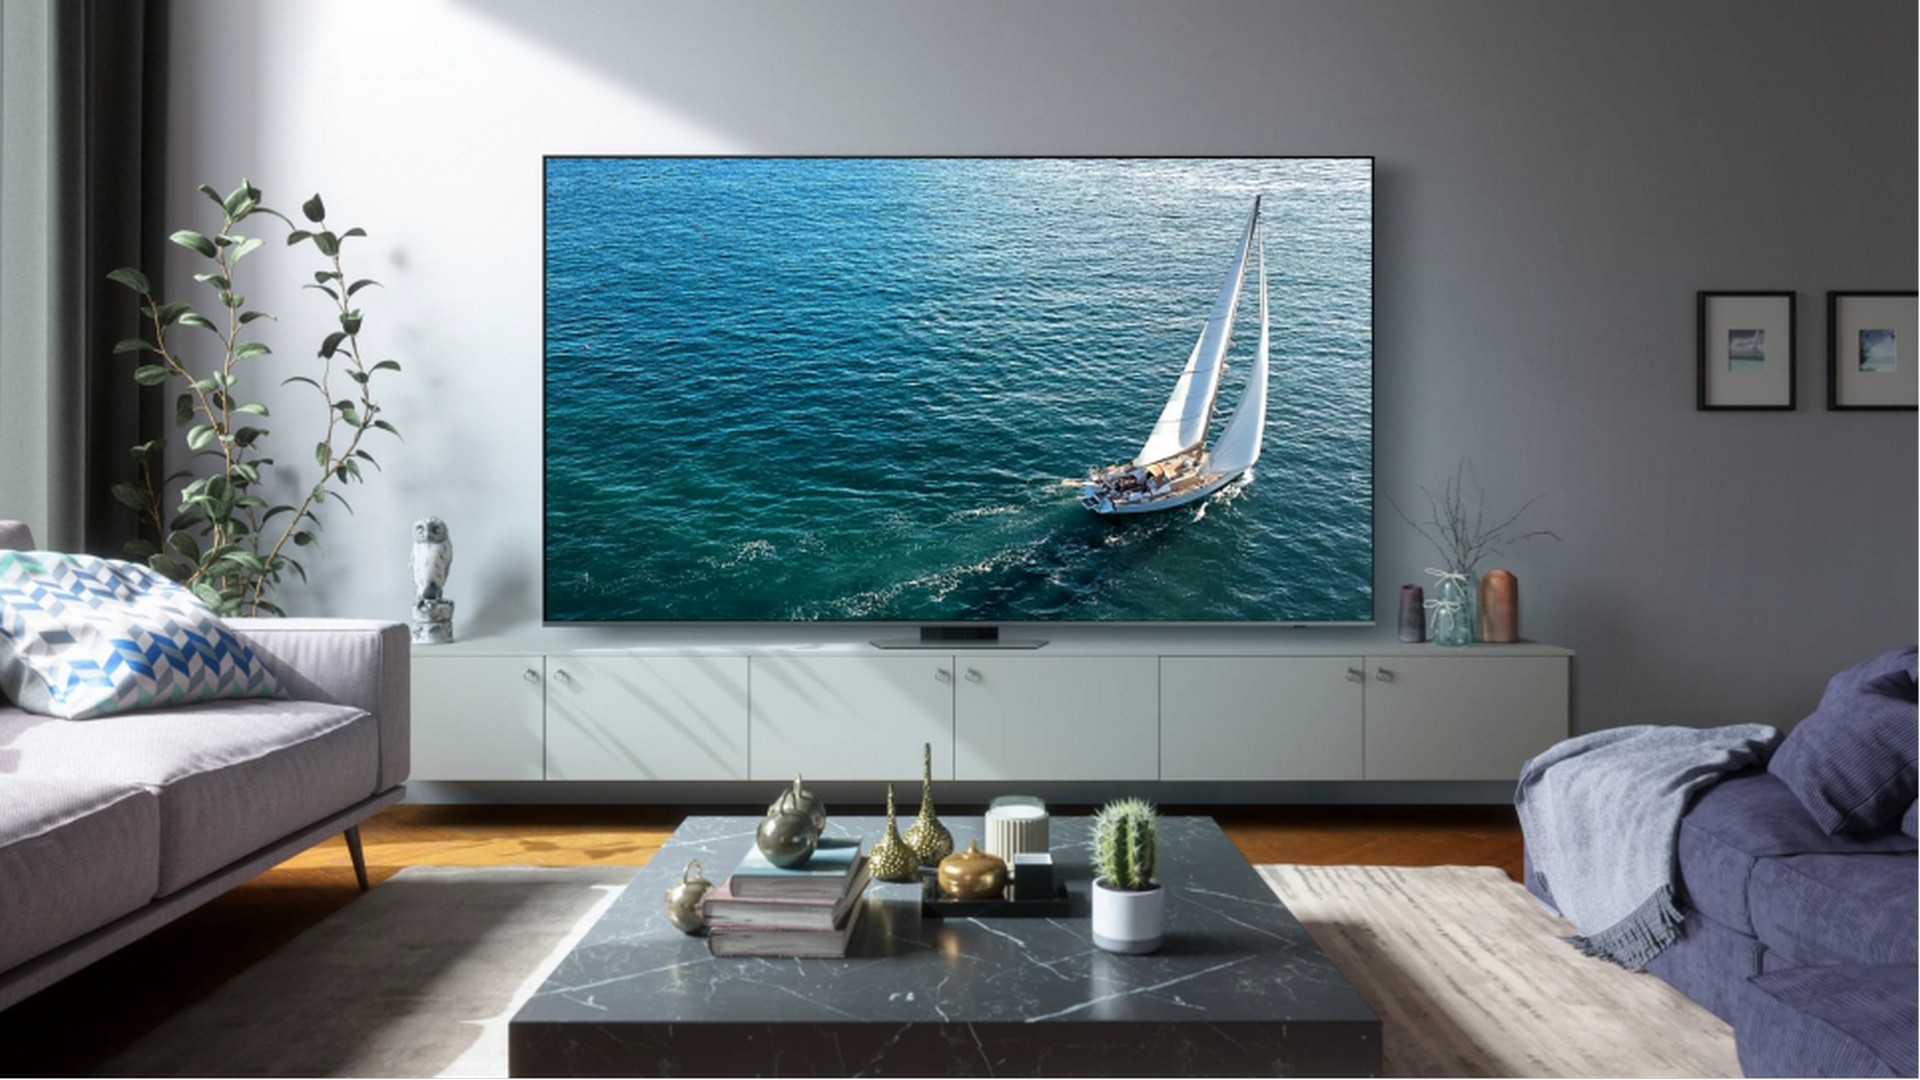 Samsung Supersizes Home Cinema Experiences With New 98-Inch QLED 4K Smart TV